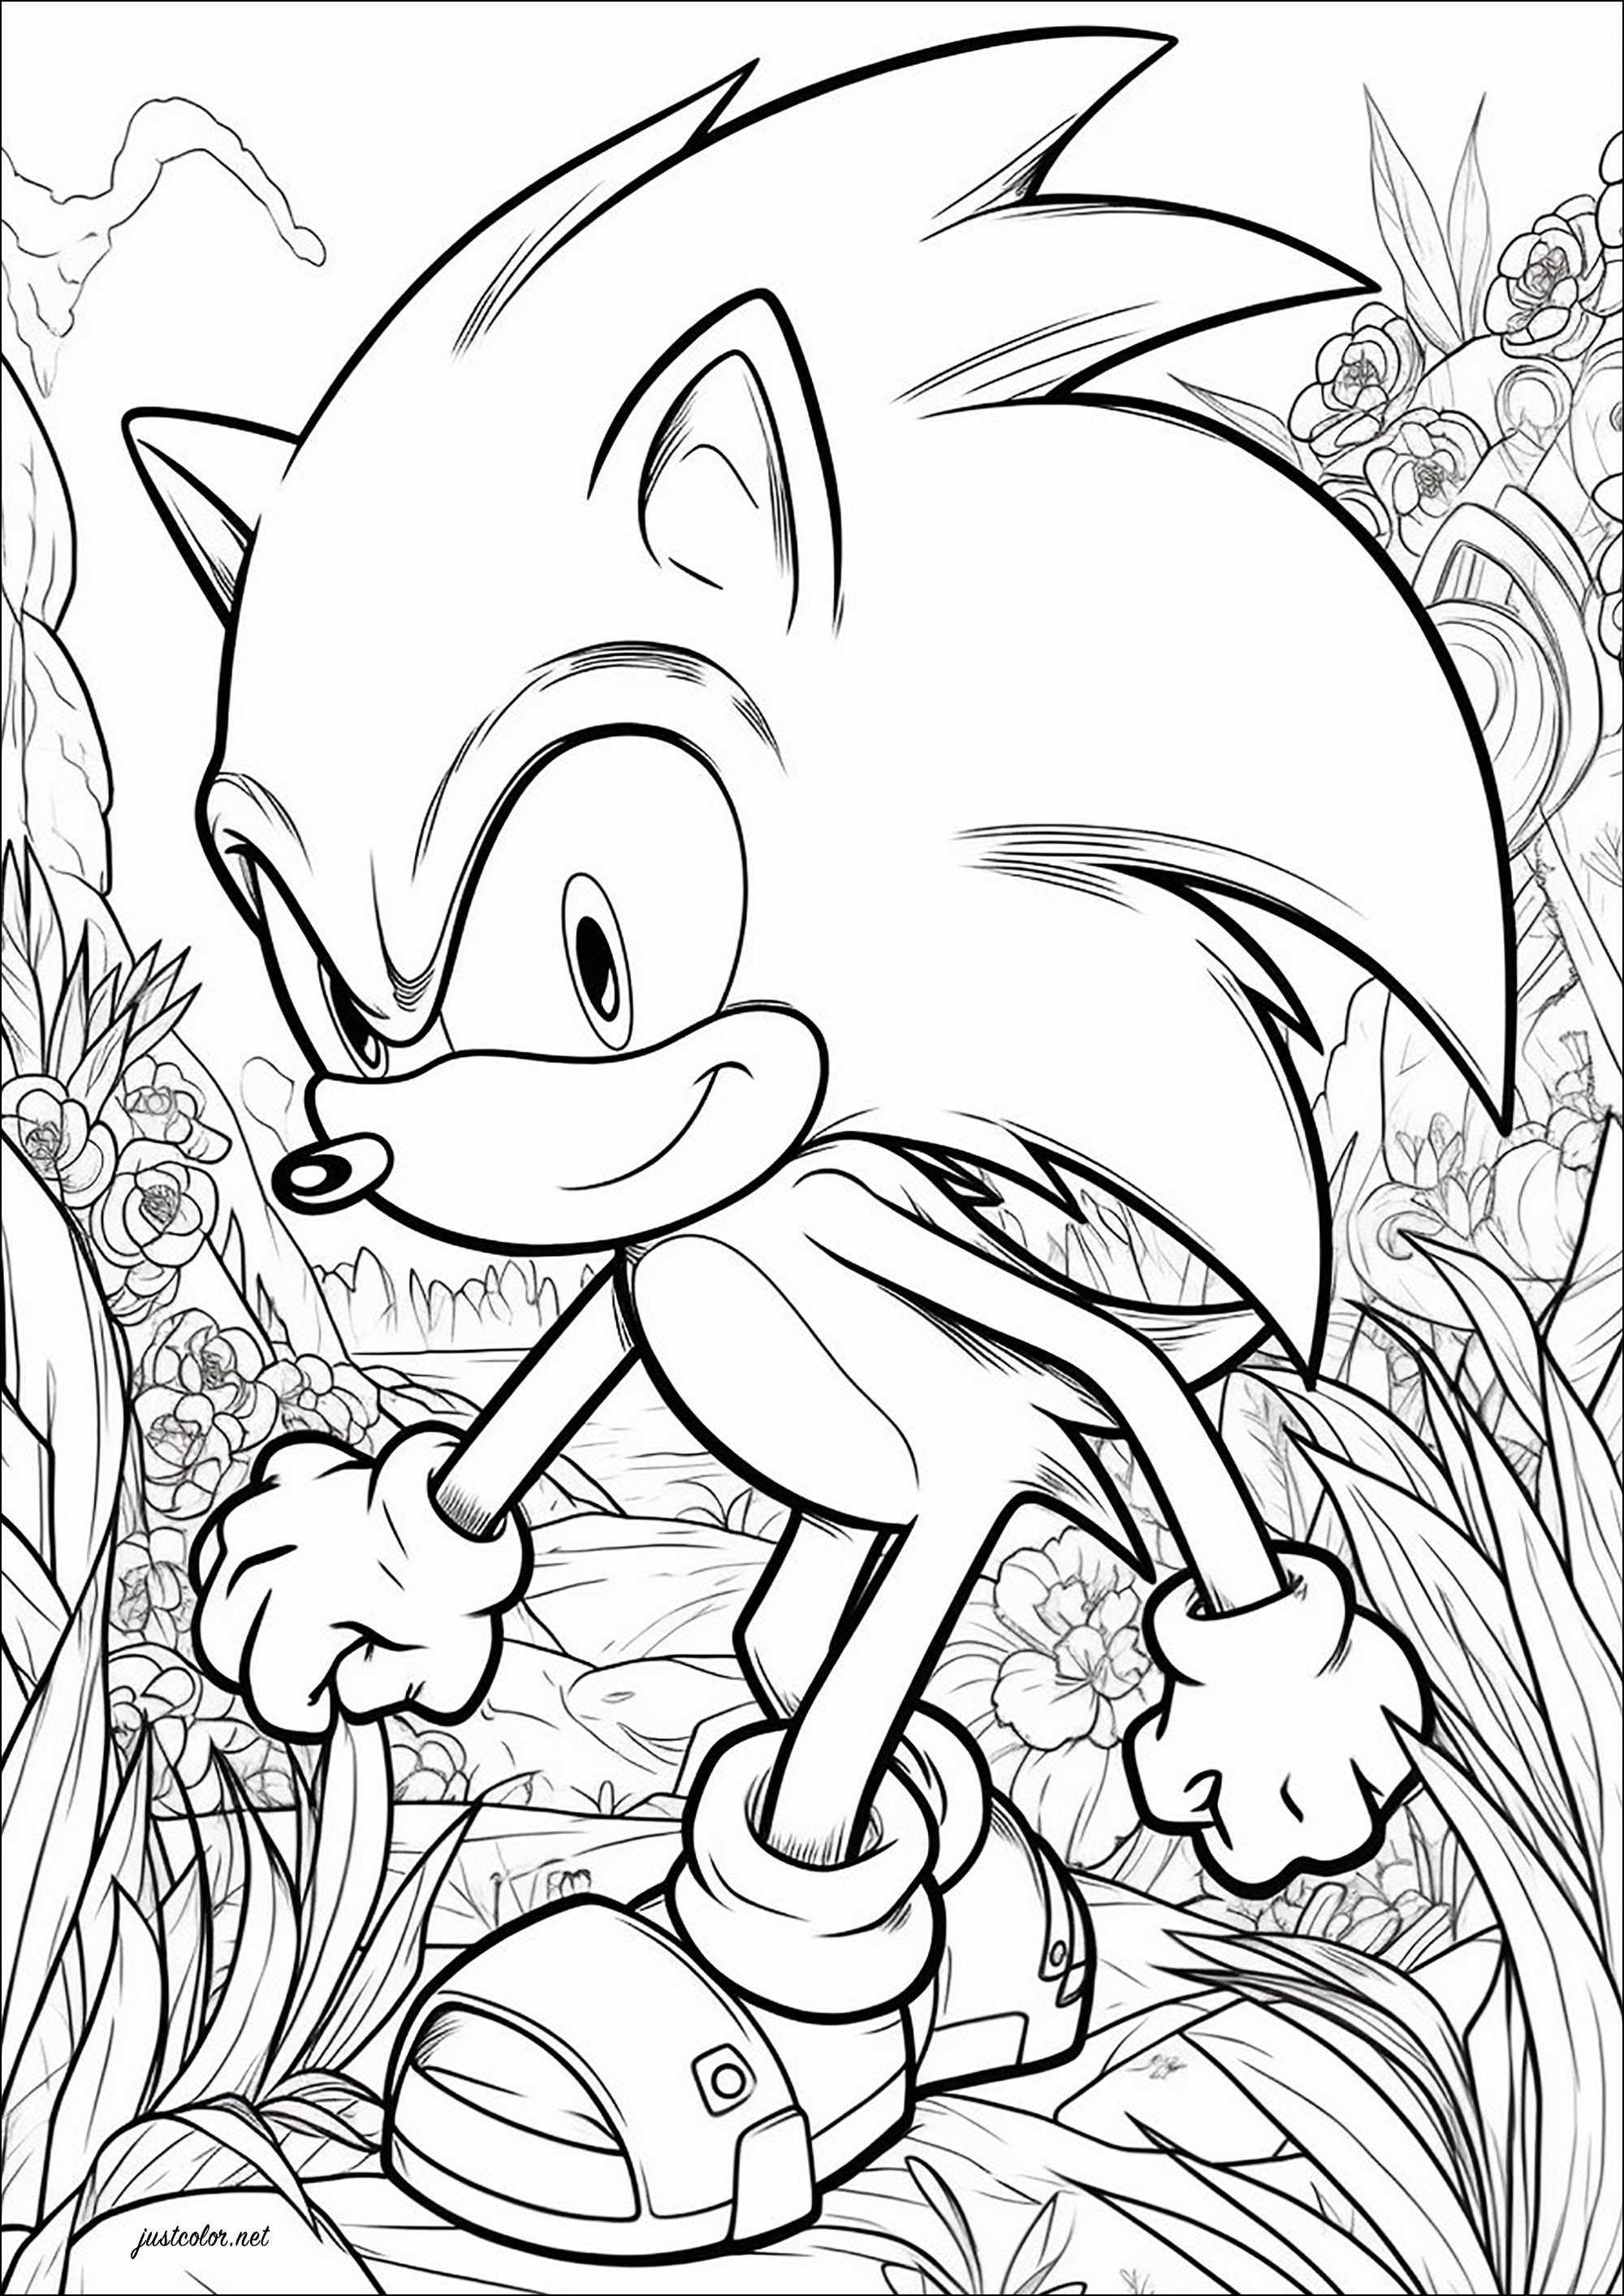 Sonic the hedgehog and a pretty flowery background. Sonic the Hedgehog is a video game series developed by the Japanese firm Sega since 1991. It features the company's mascot Sonic, an anthropomorphic blue hedgehog, battling the series' main antagonist, Dr. Eggman.